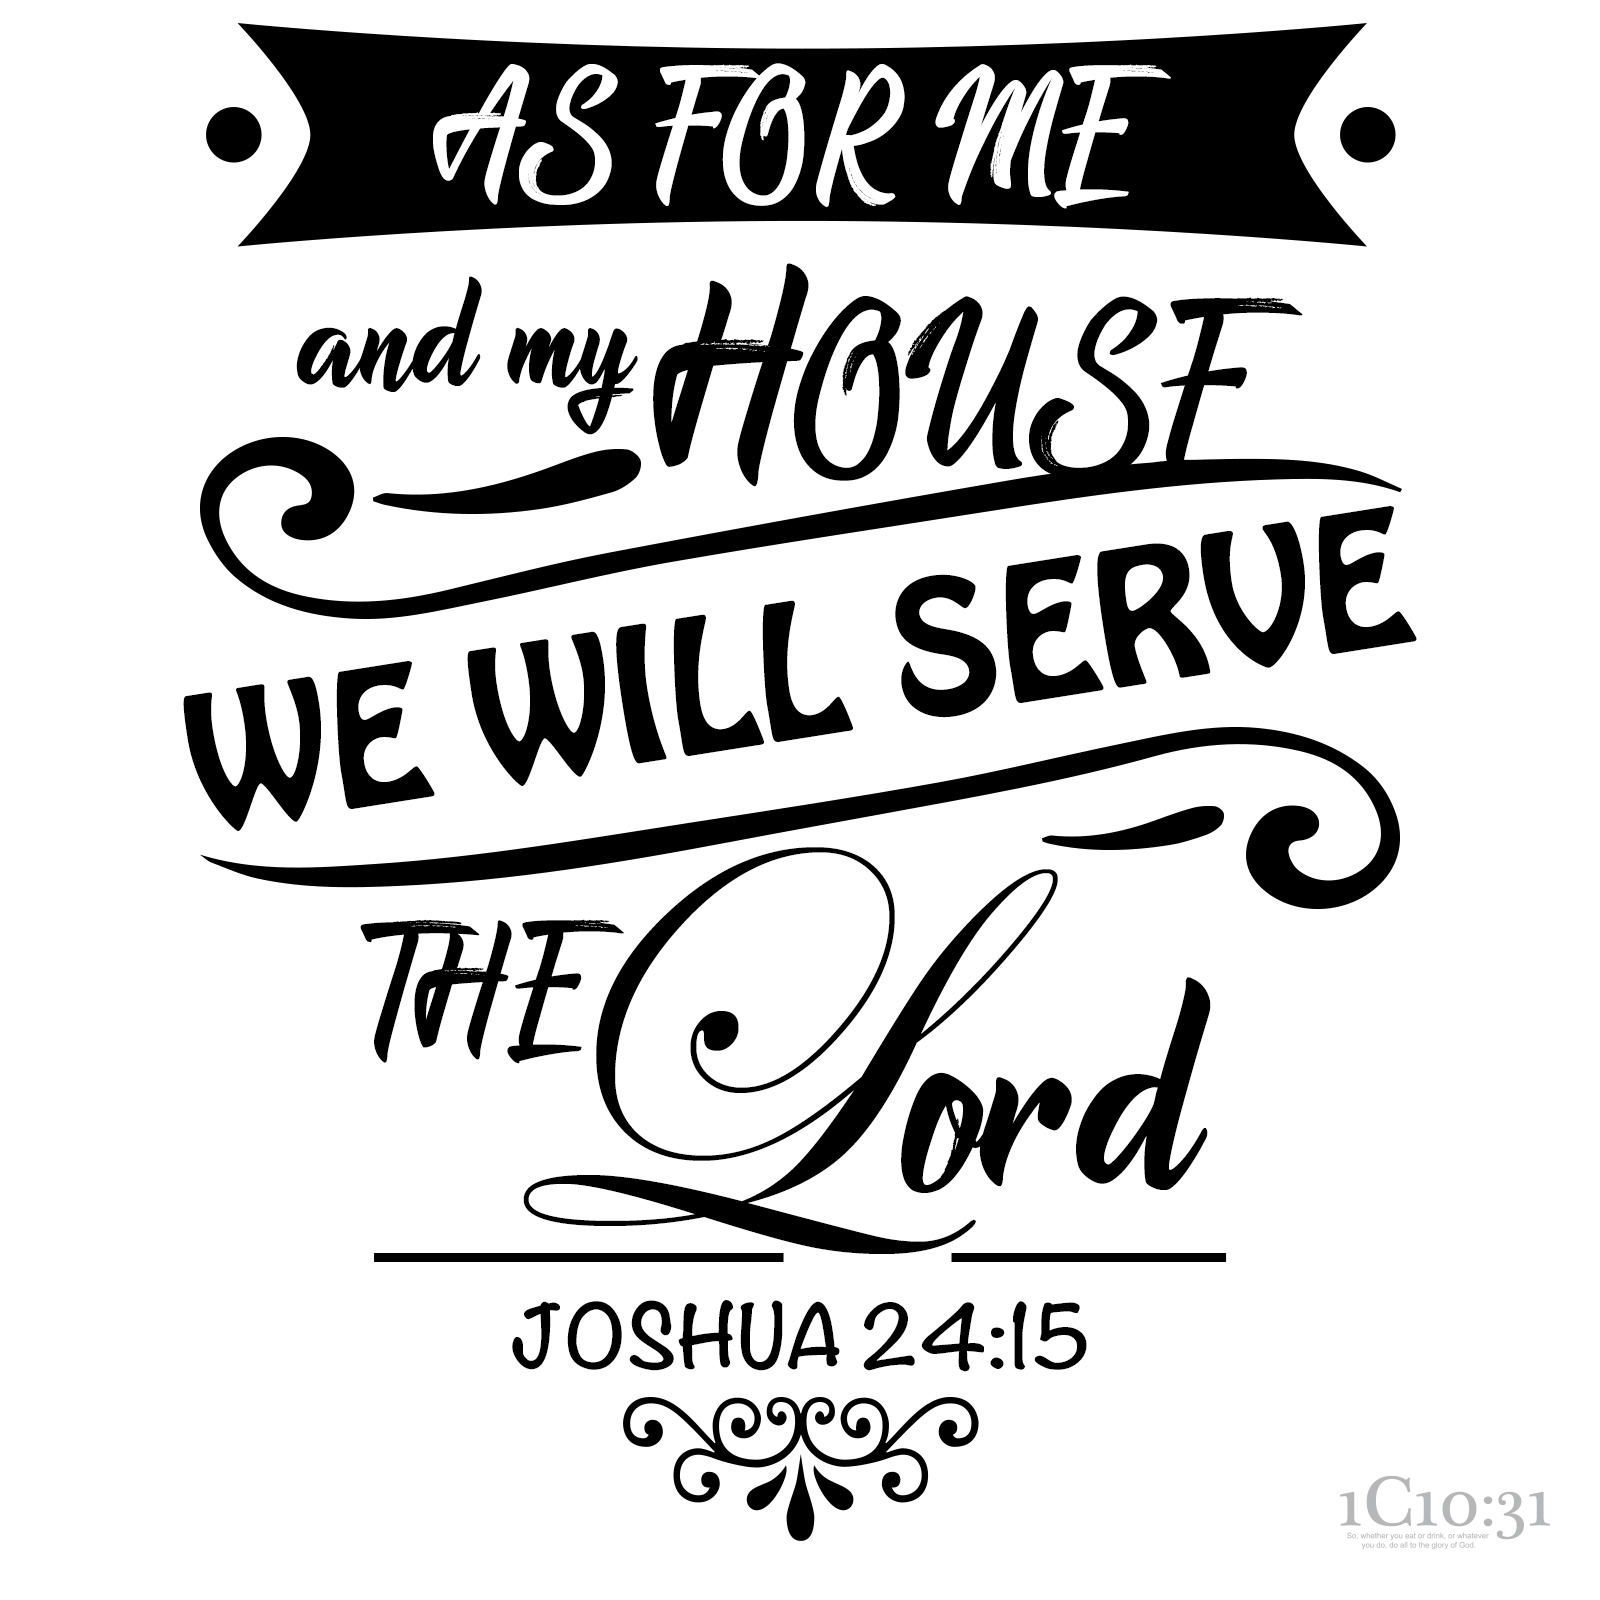 Joshua 24:15 But if serving the Lord seems undesirable to you, then choose for yourselves this day whom you will serve, whether the gods your ancestors served beyond the Euphrates, or the gods of the Amorites, in whose land you are living. But as for me and my household, we will serve the Lord.”